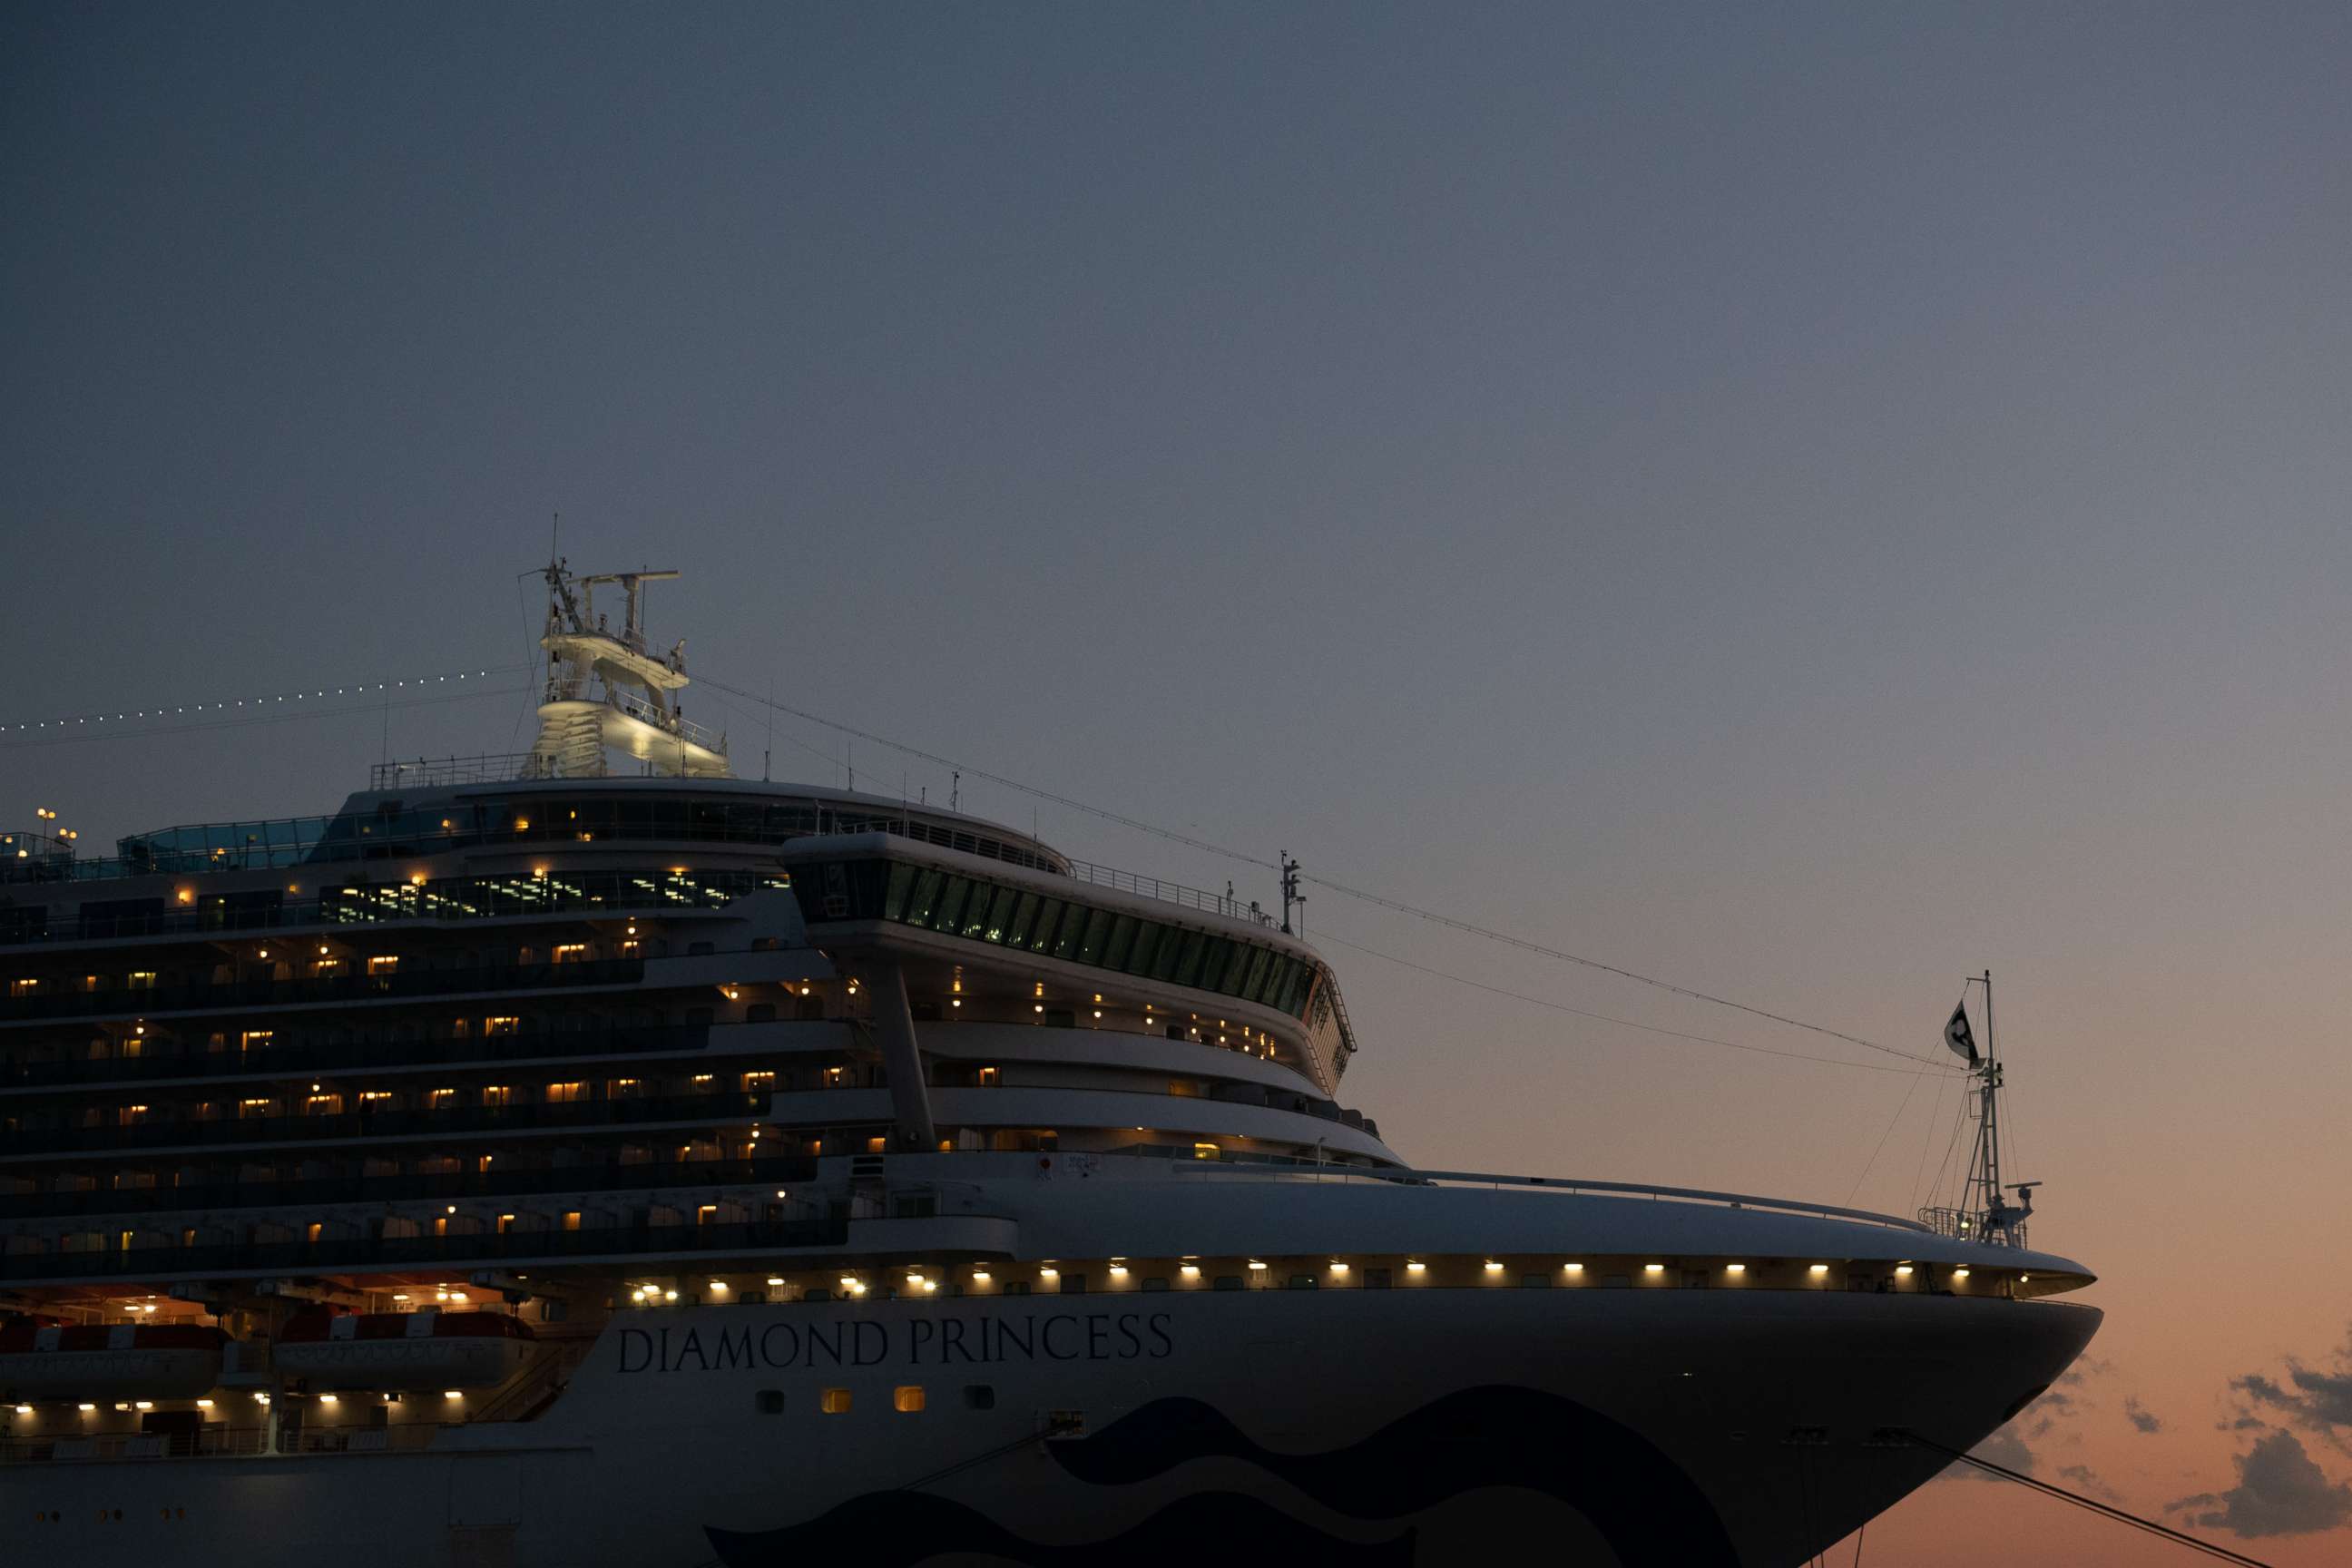 PHOTO: The Diamond Princess cruise ship sits docked at Daikoku Pier in the Japanese port of Yokohama where it remains in quarantine after a number of people on board were diagnosed with the novel coronavirus, Feb. 10, 2020.